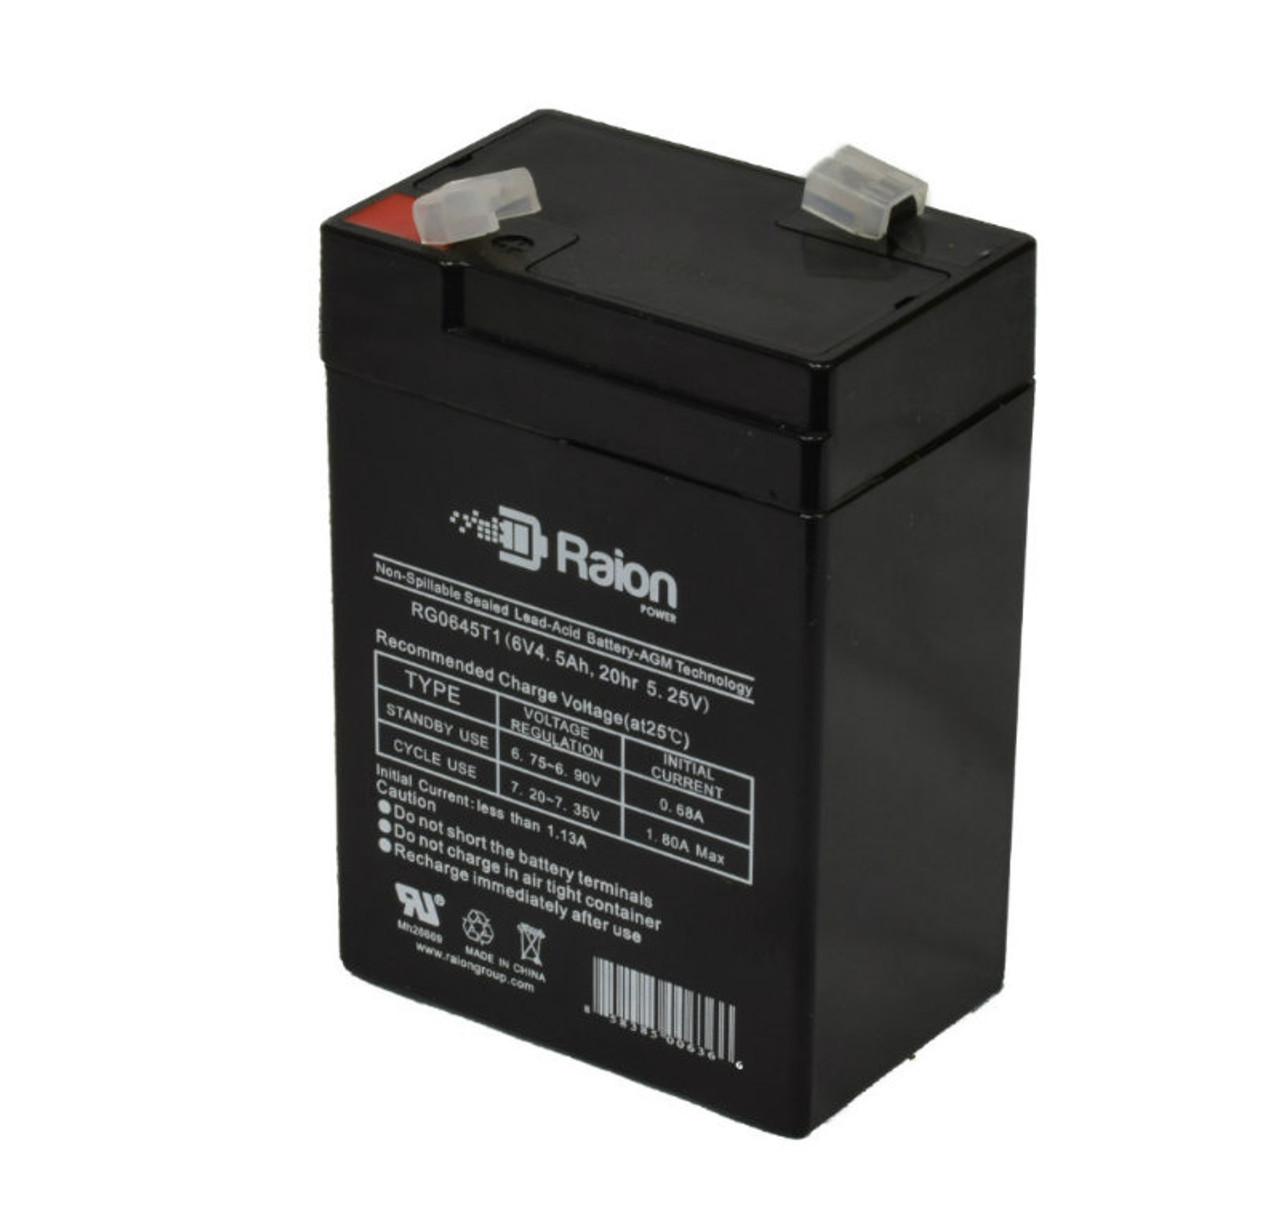 Raion Power RG0645T1 6V 4.5Ah Replacement Battery Cartridge for Mcgaw 2001 Intell Pump/Infusor